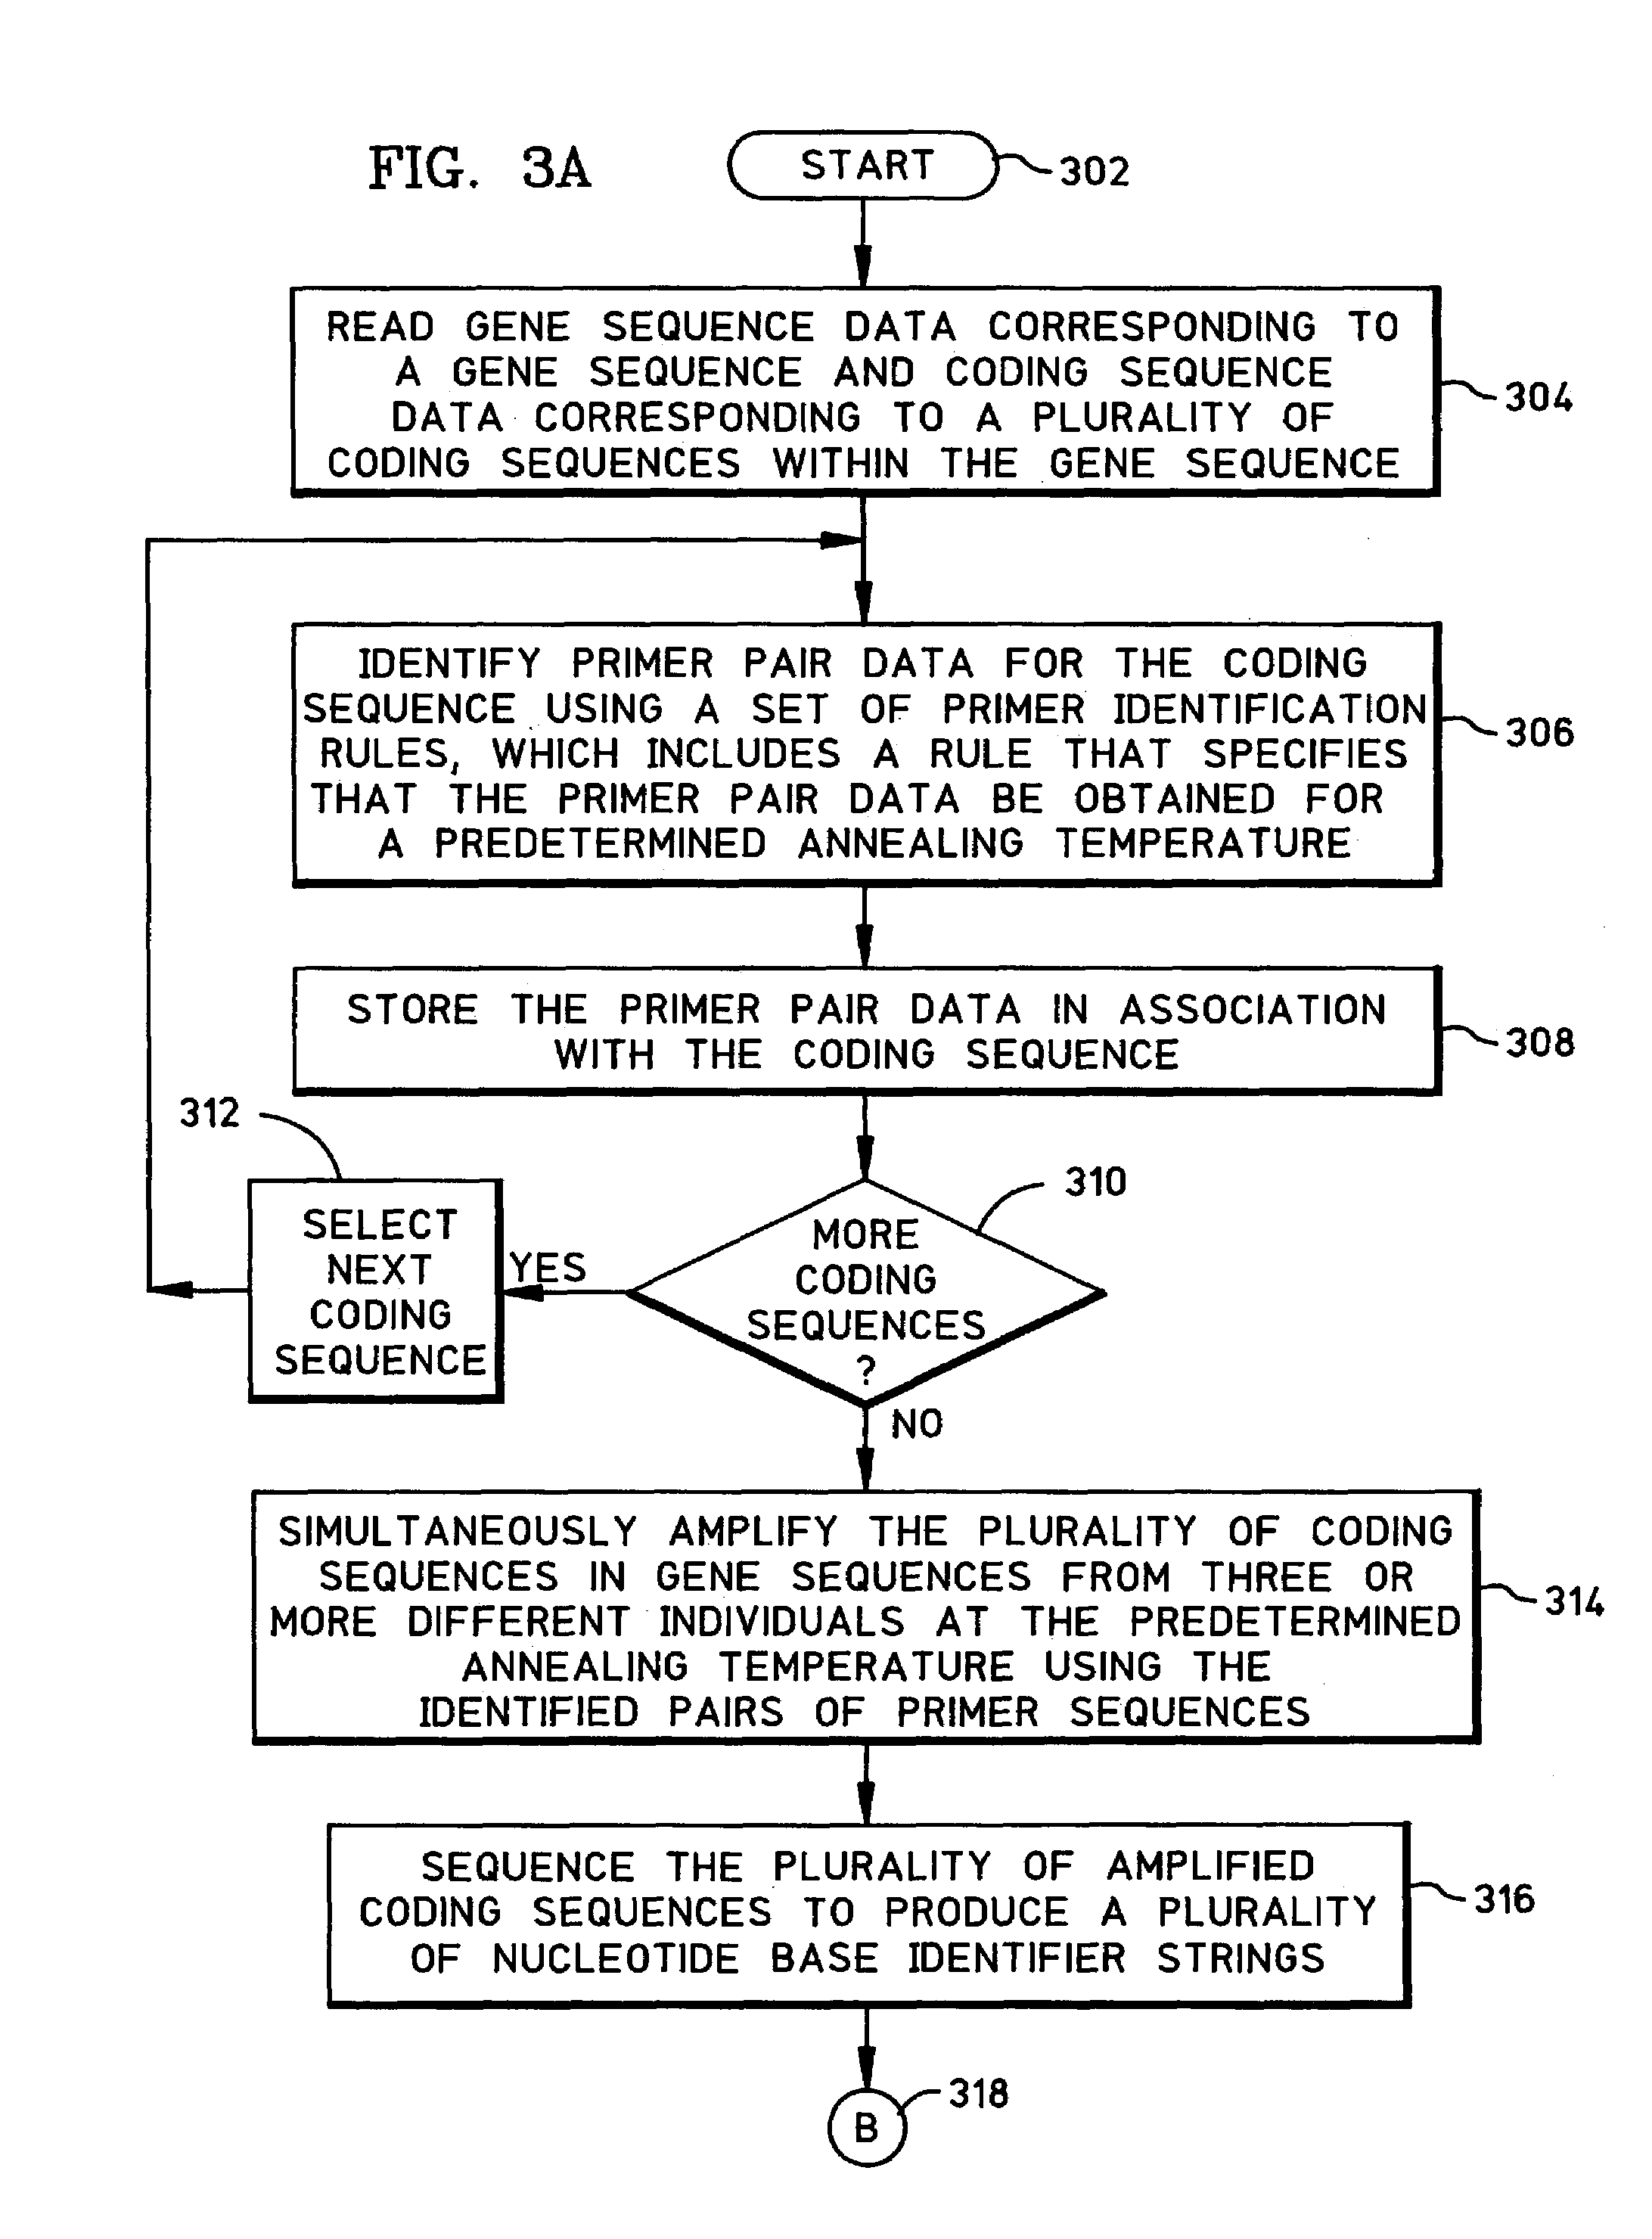 Efficient methods and apparatus for high-throughput processing of gene sequence data